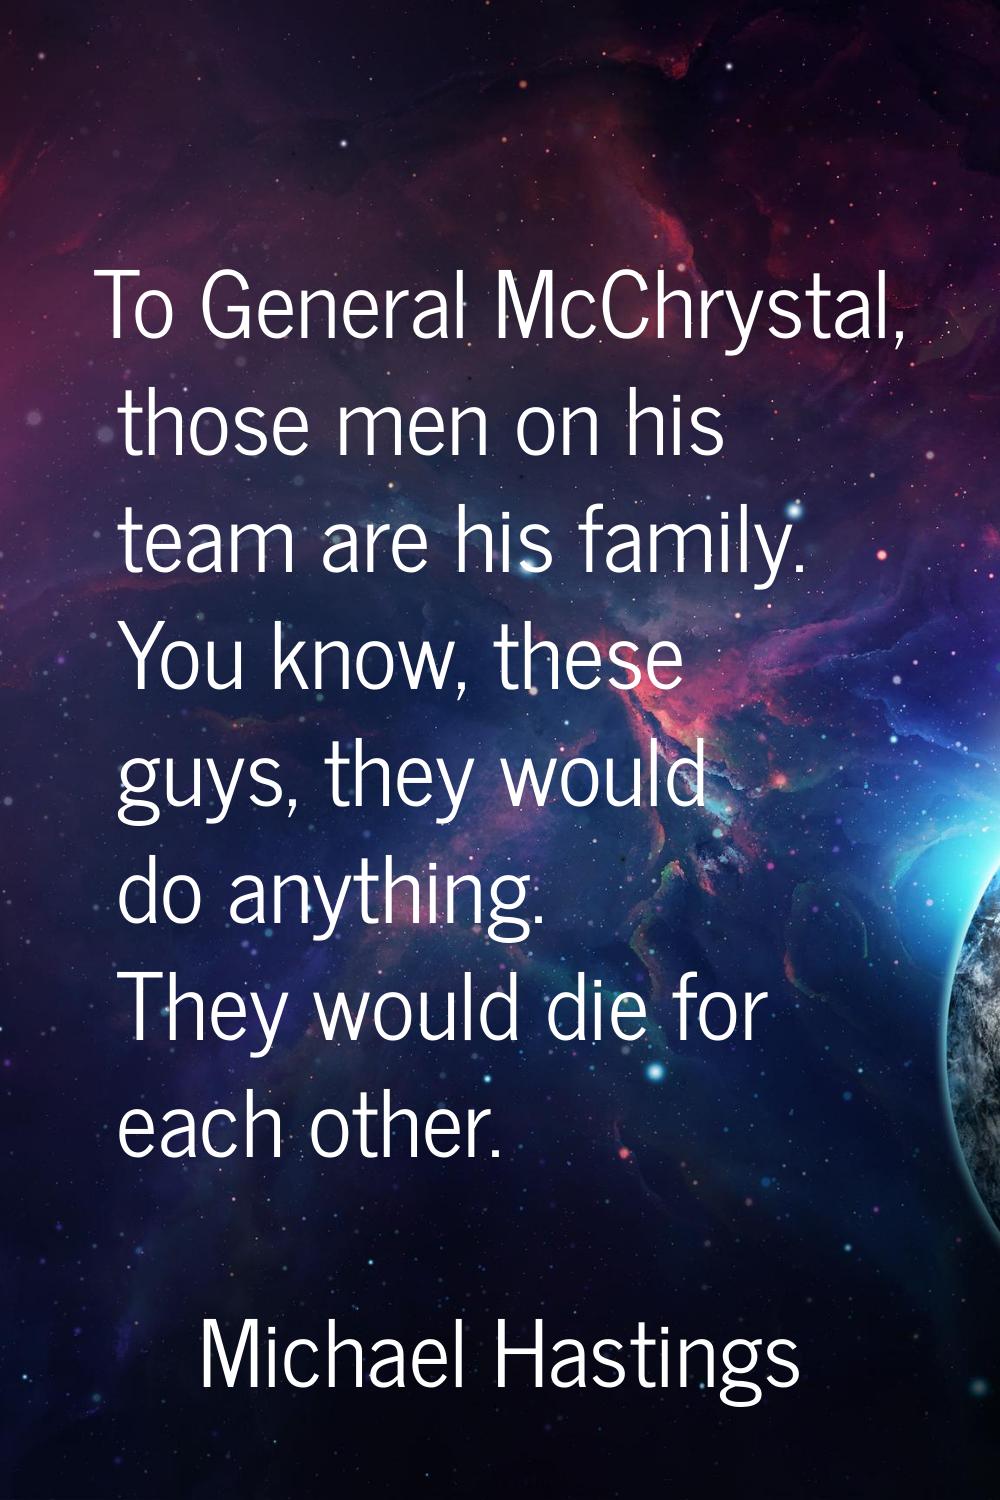 To General McChrystal, those men on his team are his family. You know, these guys, they would do an